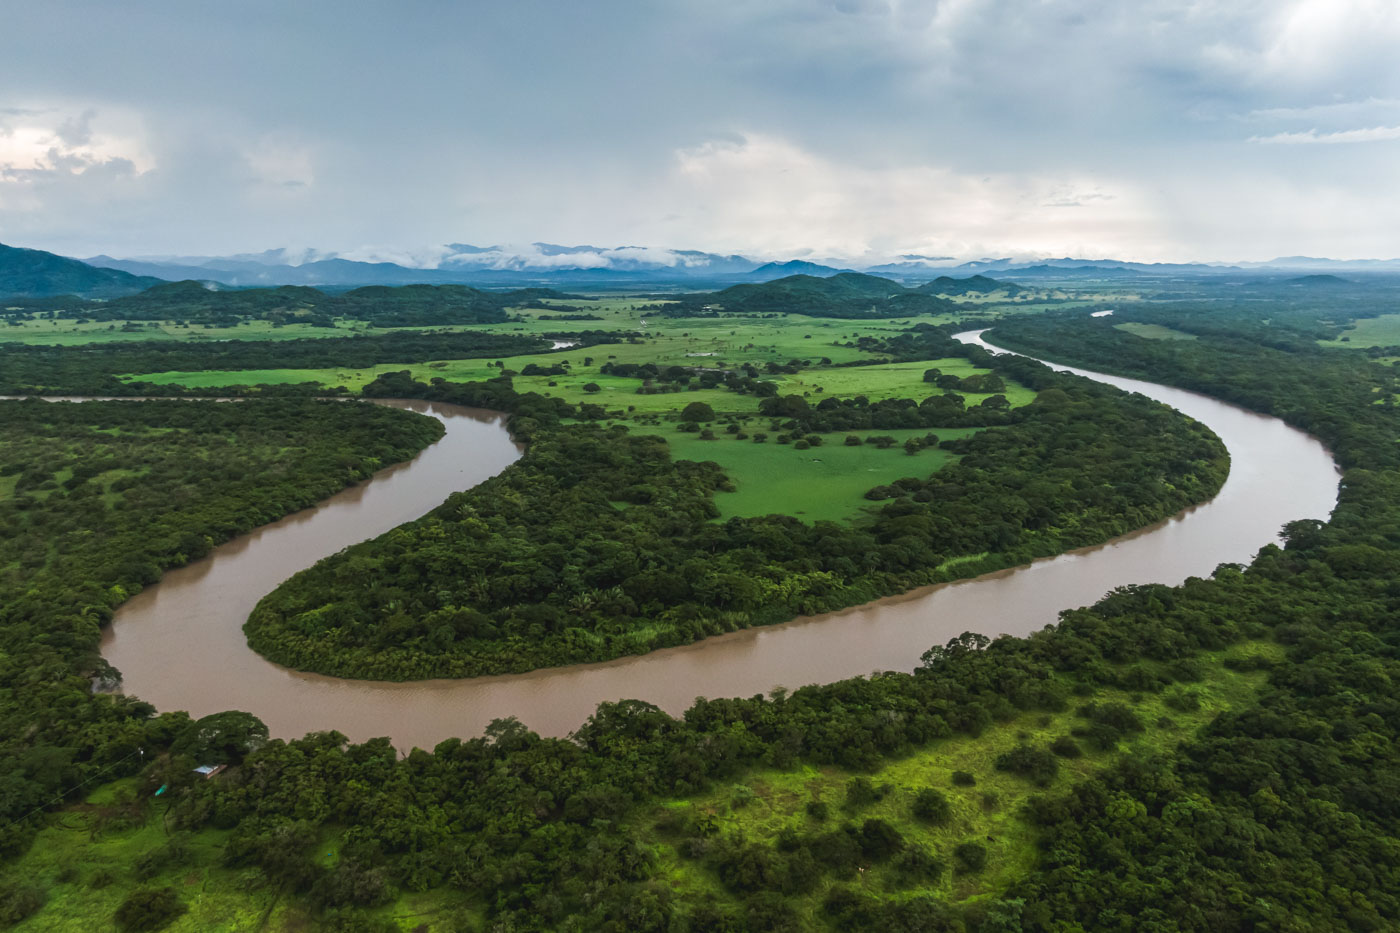 Aerial view over the winding Tempisque River running through the forests and fields of Palo Verde National Park.